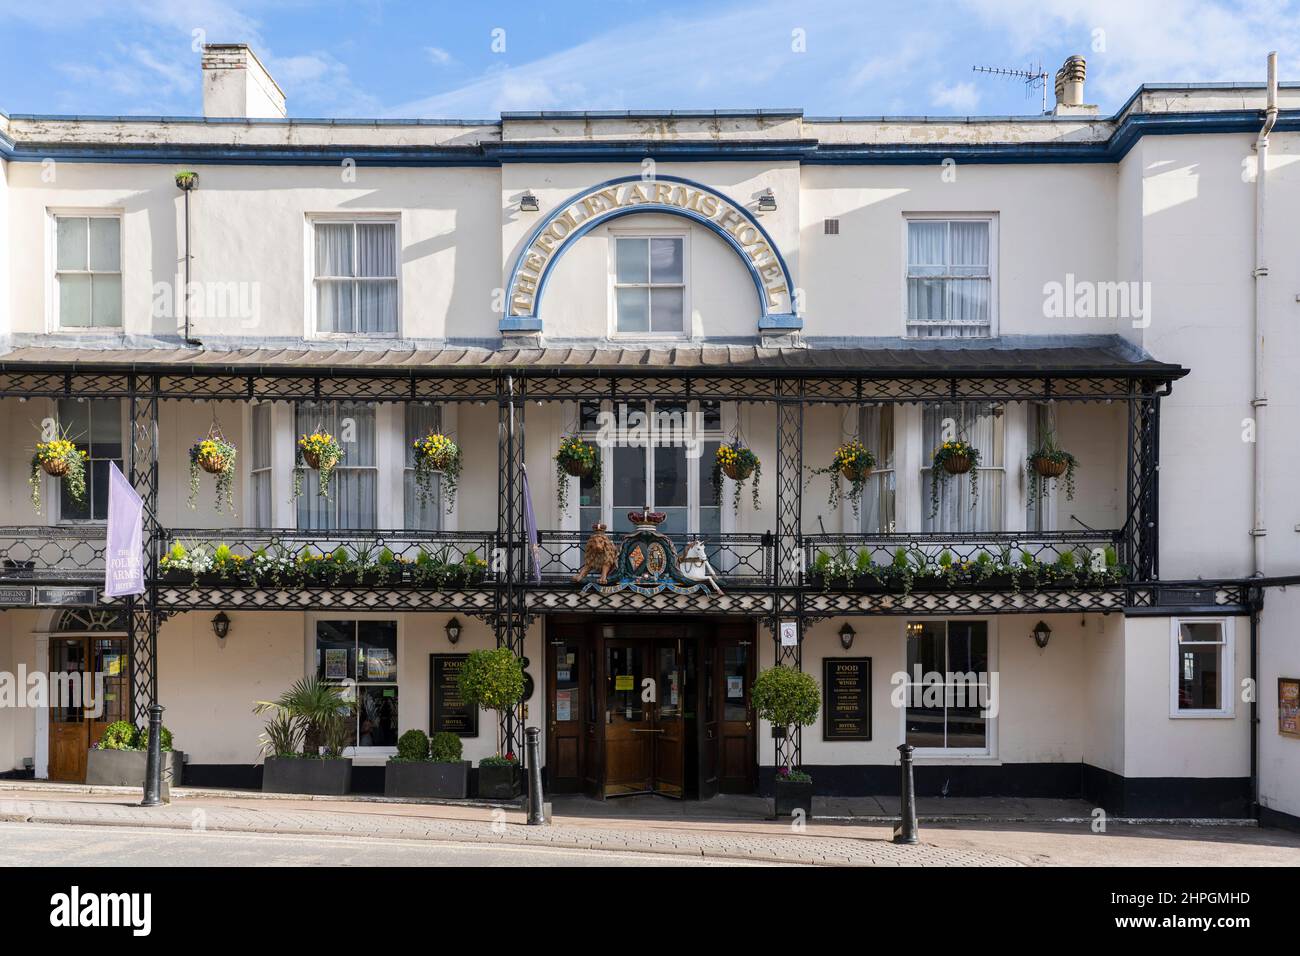 The Foley Arms Hotel, A Wetherspoon Free House, The Georgian-style coaching inn was designed for John Downs by Samuel Deykes. Great Malvern, England Stock Photo